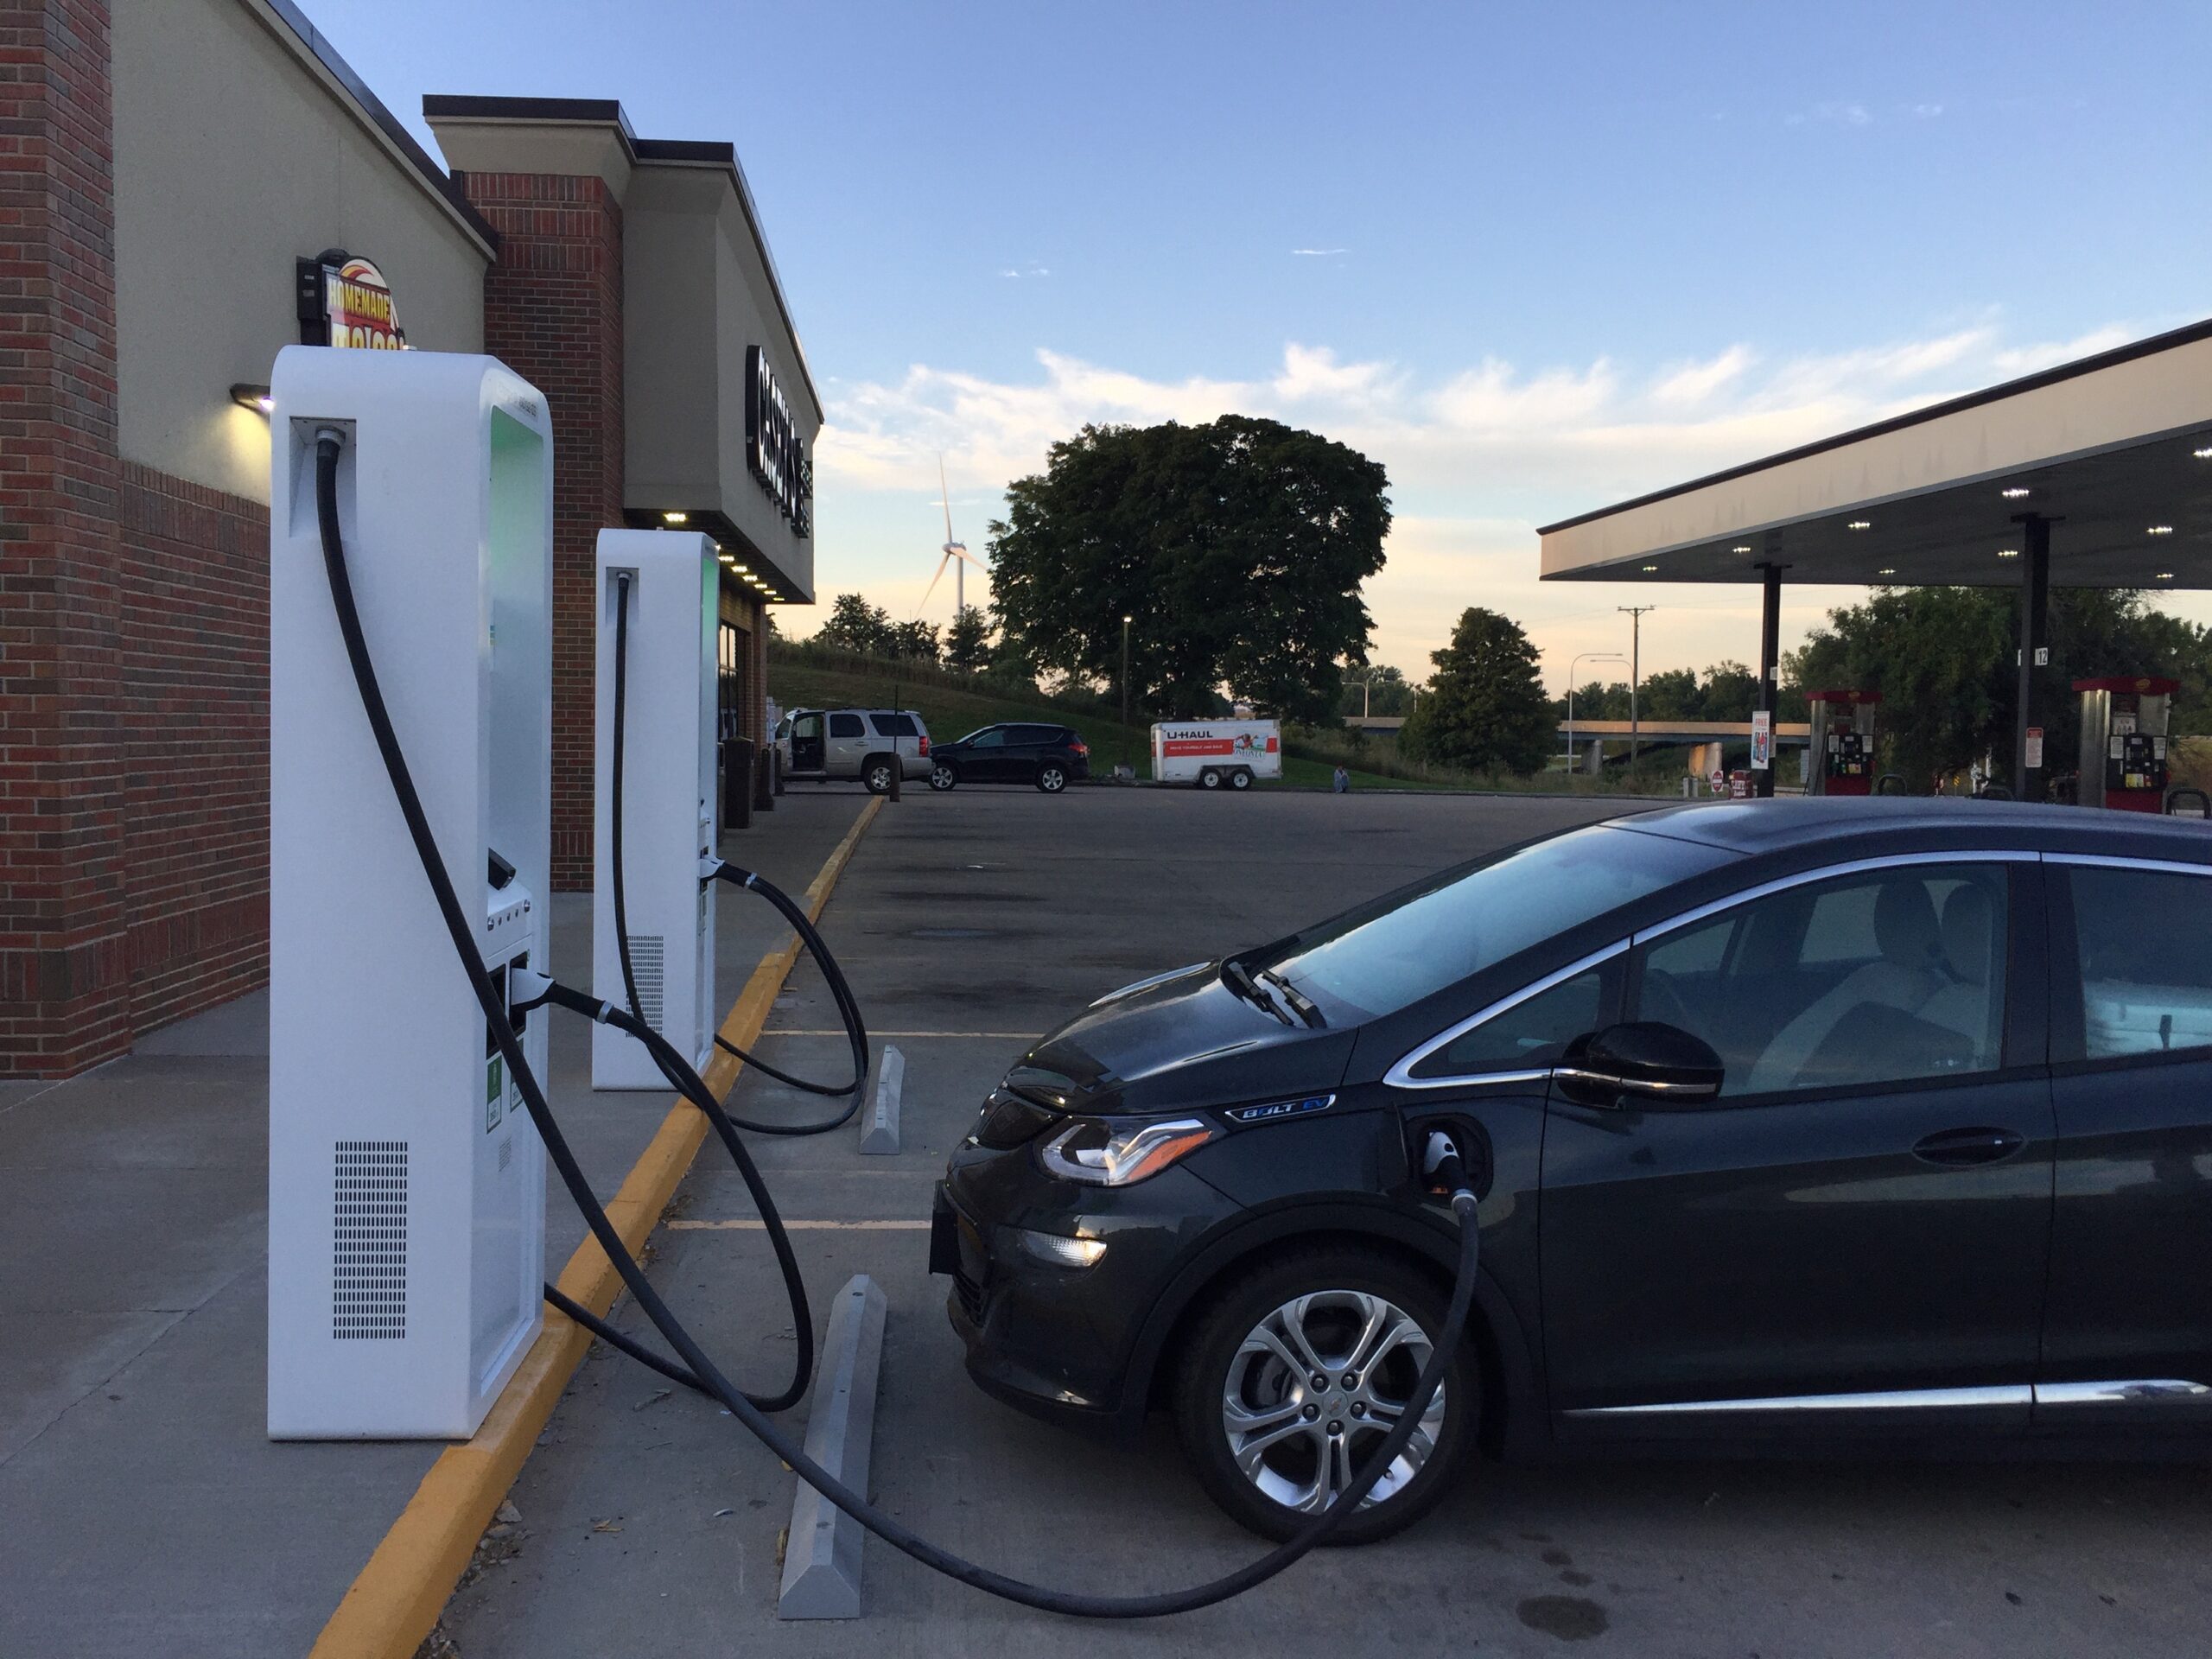 City of Durango to Discuss New Fast Chargers at the Transit Center – Needs Your Comments & Support!